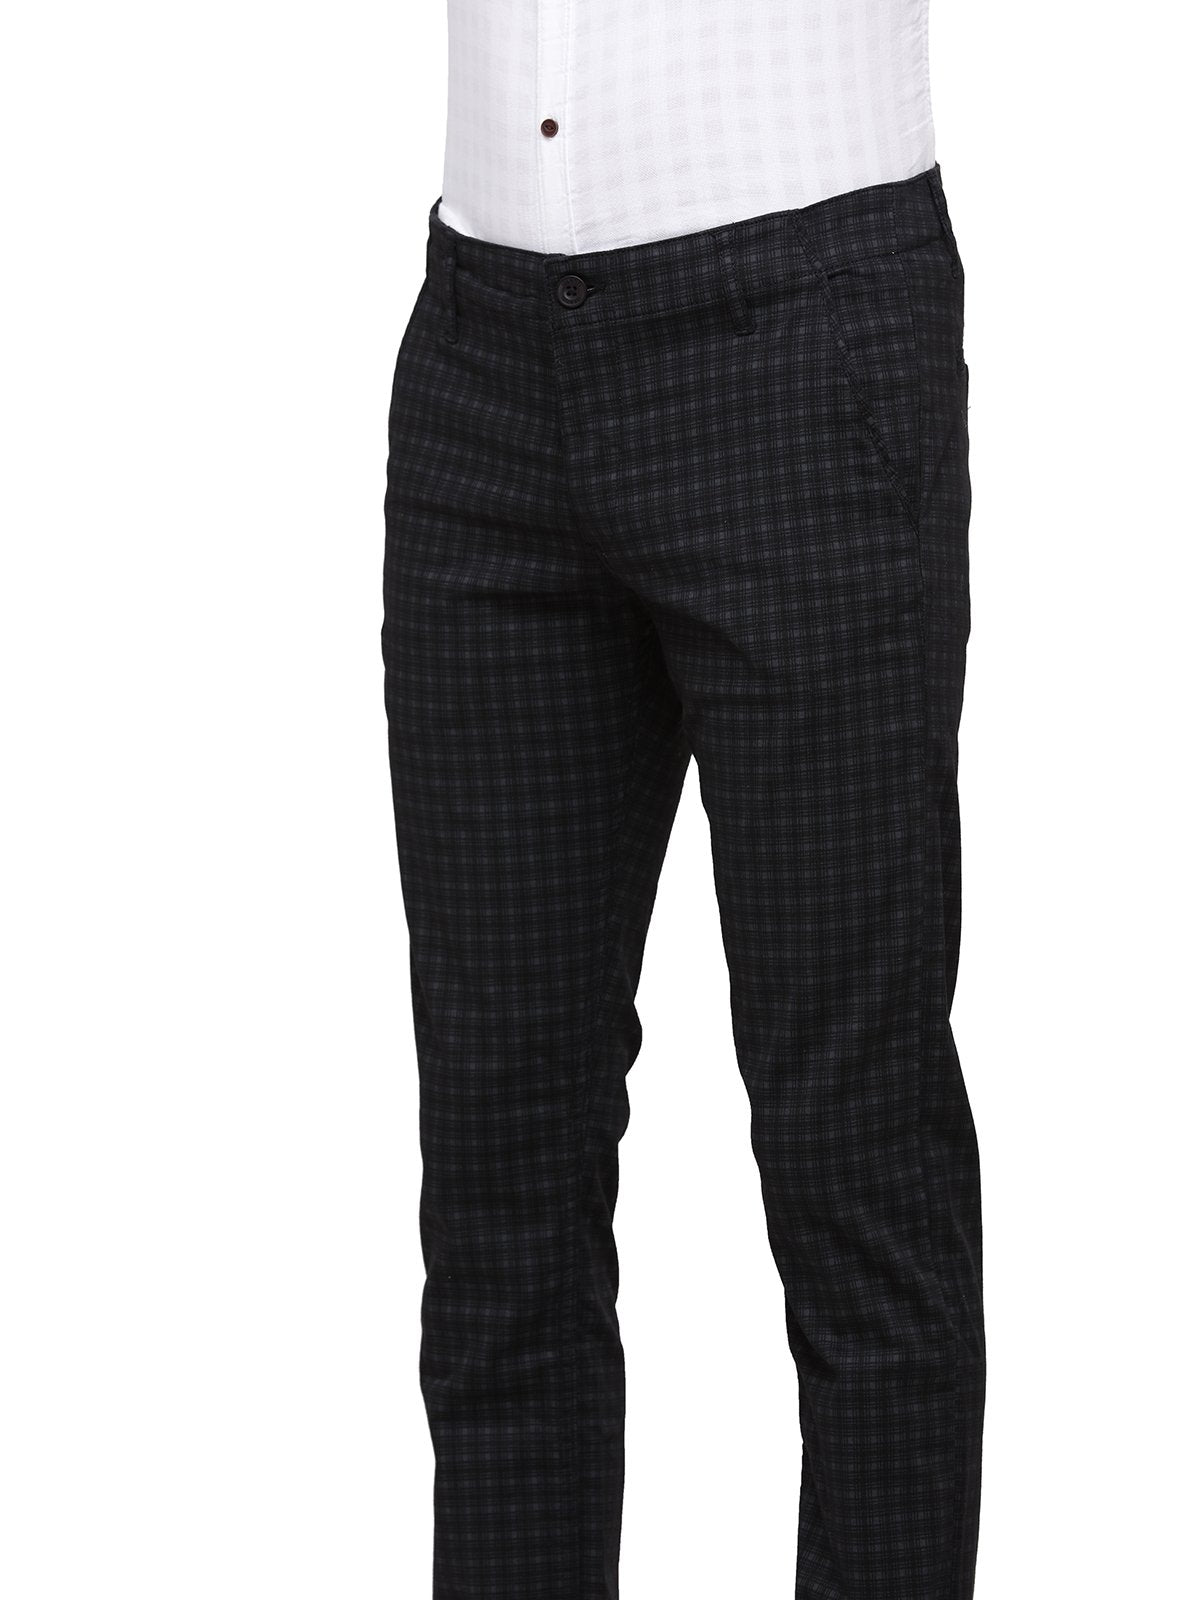 Men Black Checkered Low-Mid Rise Athletic Skinny fit Trouser With Stretch